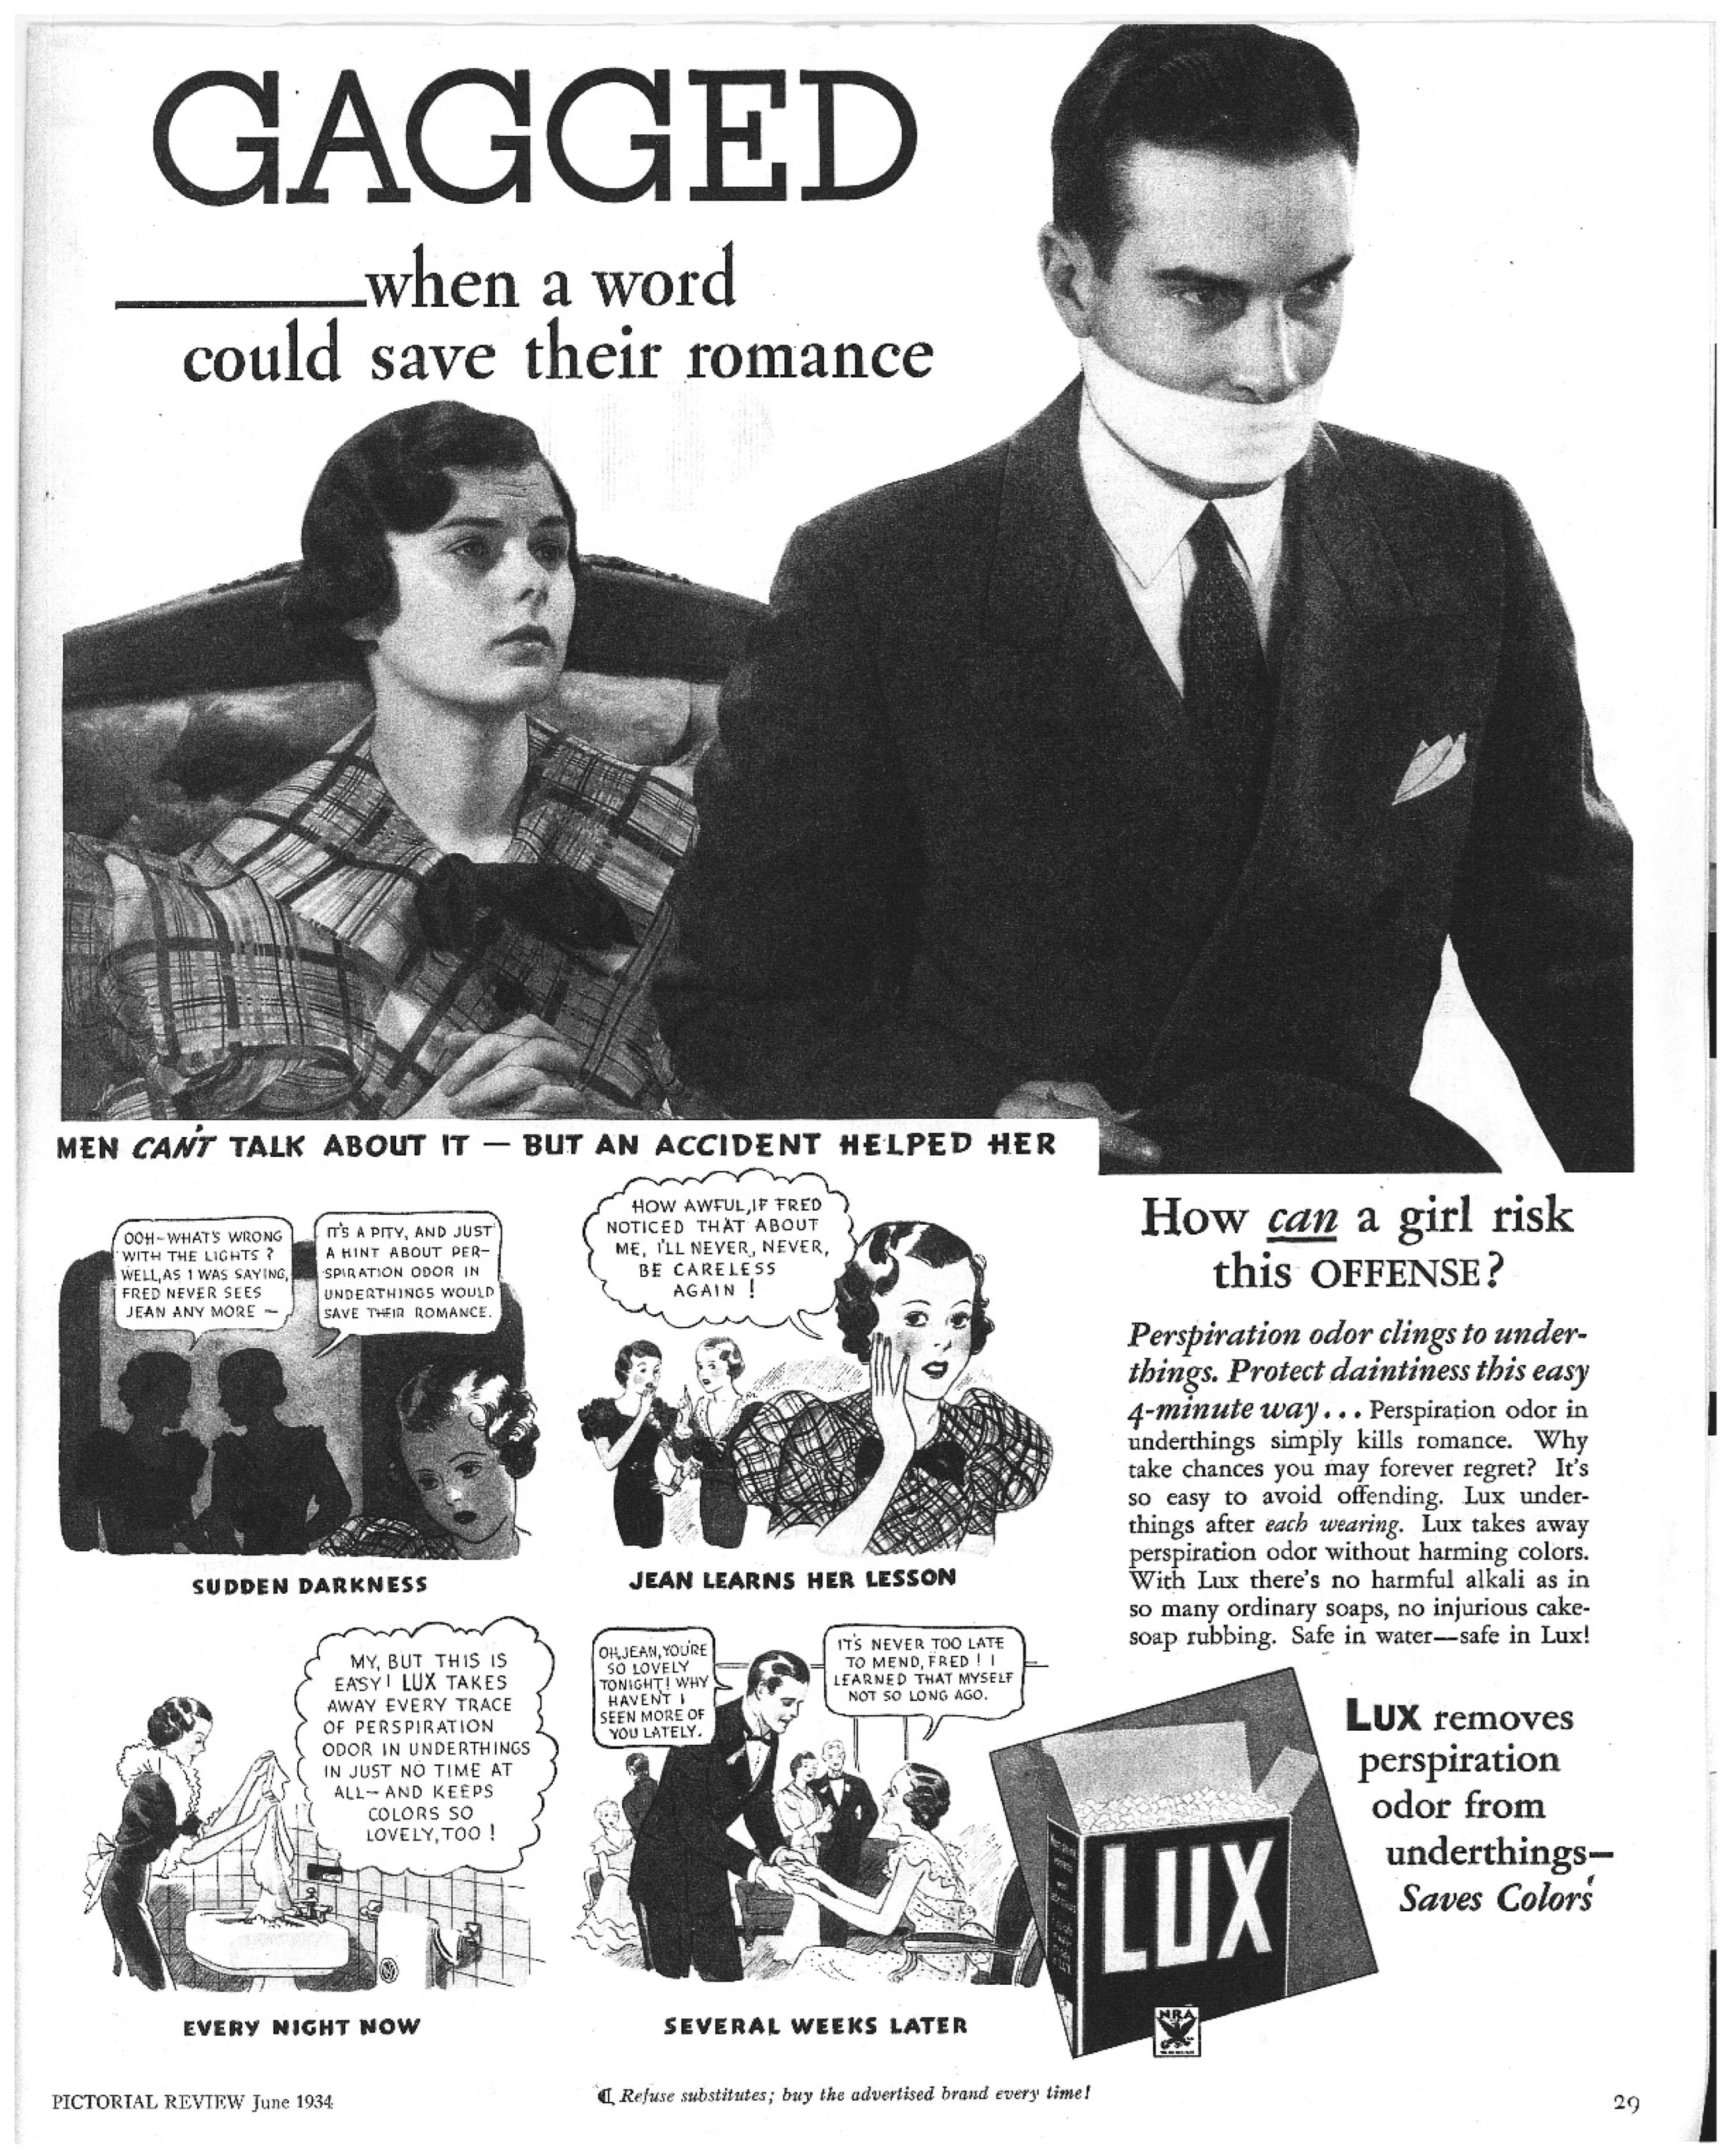 Humanities Free Full-Text The Lonely Woman Icon, Niedecker, and Mid-20th-Century Advertising pic